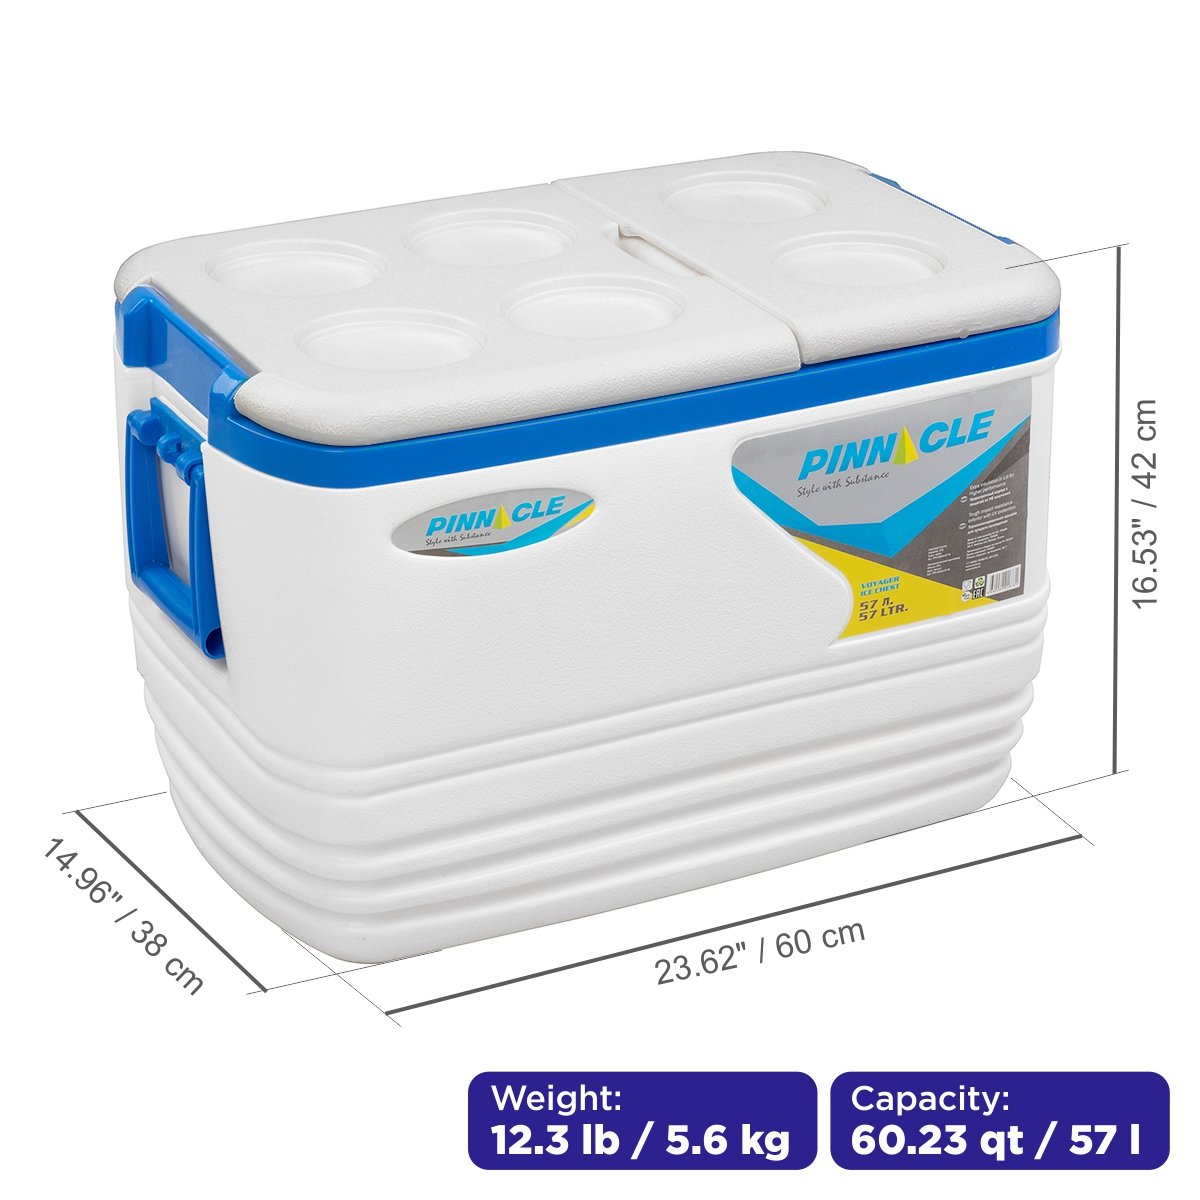 Voyager Large Ice Chest with Side Handle, Drain Plug and 6 Cup Holders, 60 qt is 23.6 inches long, 15 inches wide and 16.5 inches high, weighing 12.3 lbs